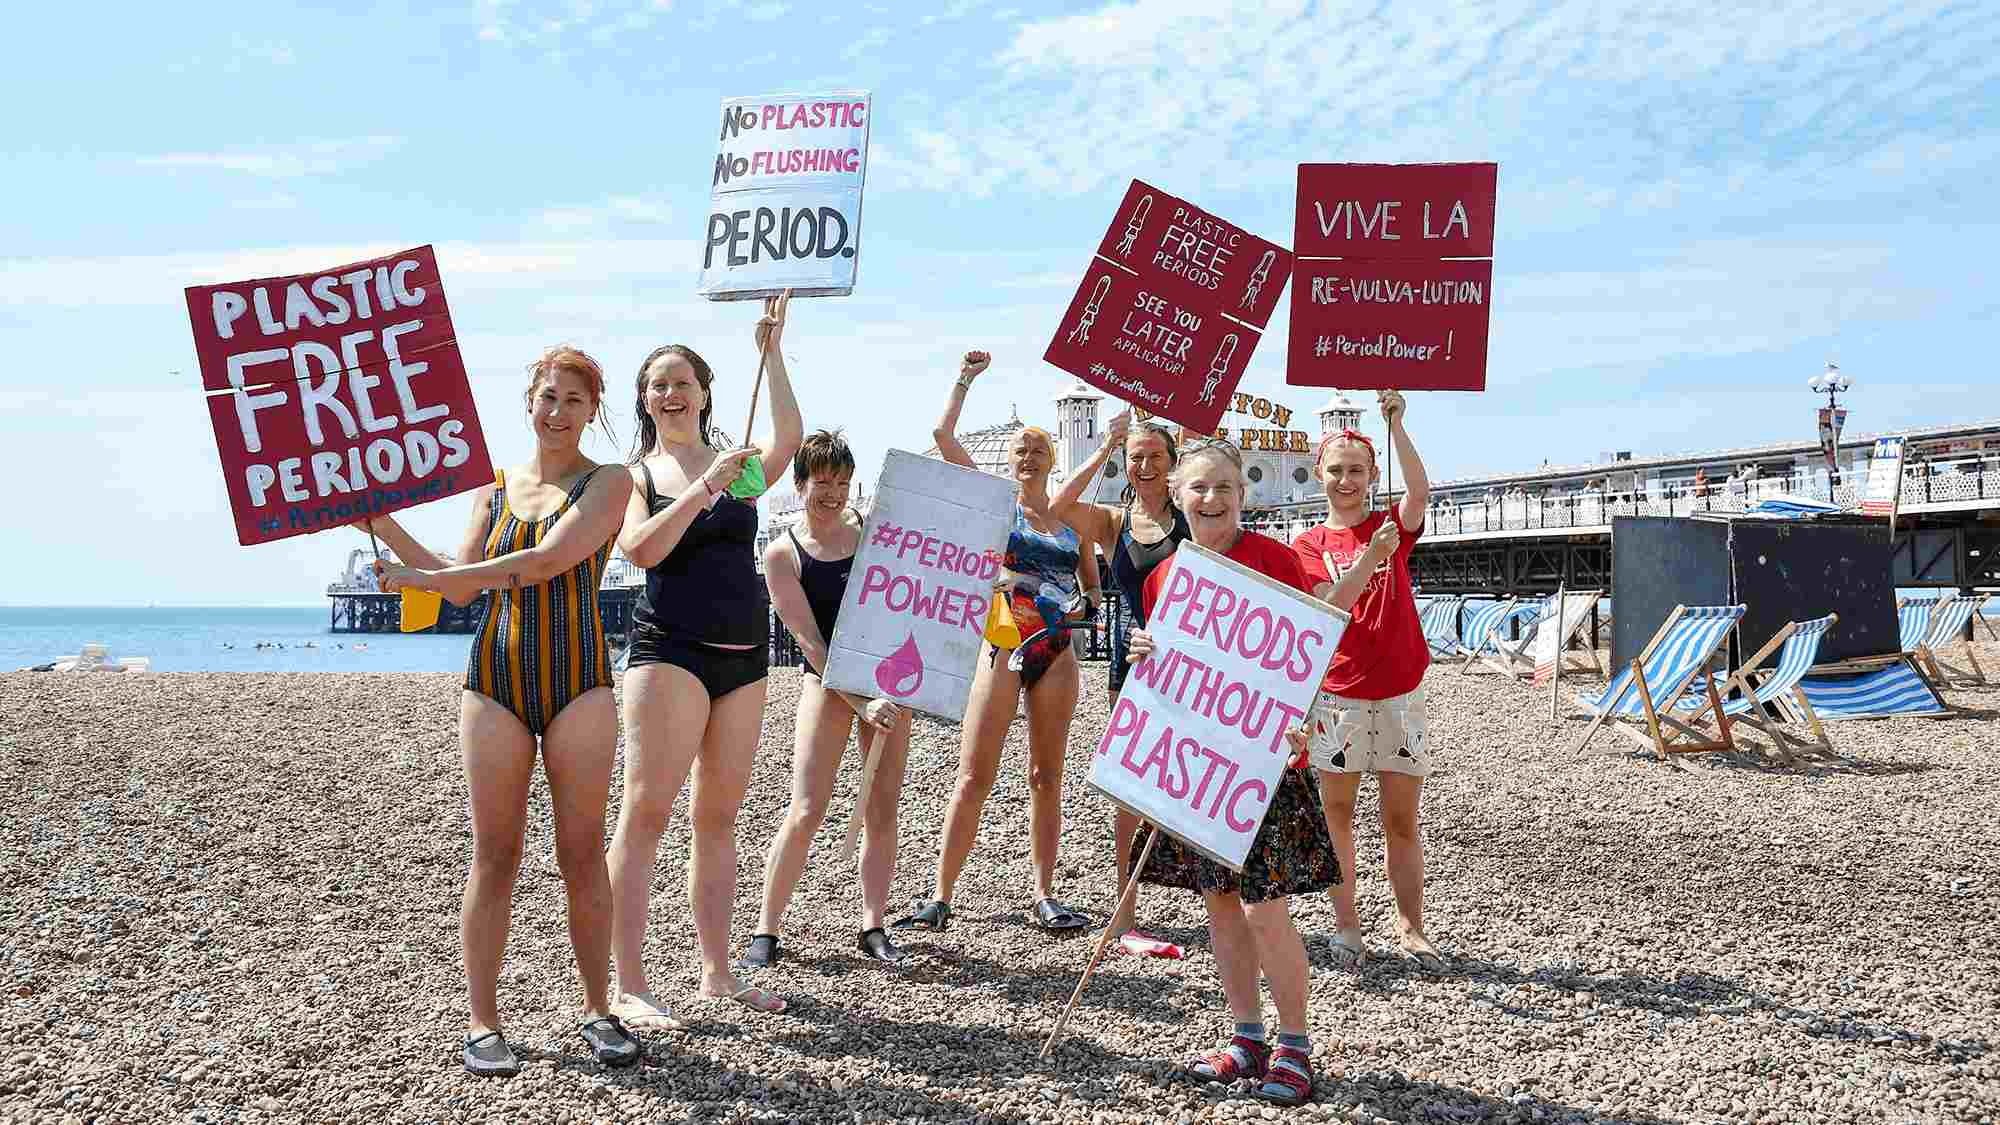 Seven women in swimsuits on a pebble beach holding placards that say "plastic free periods".